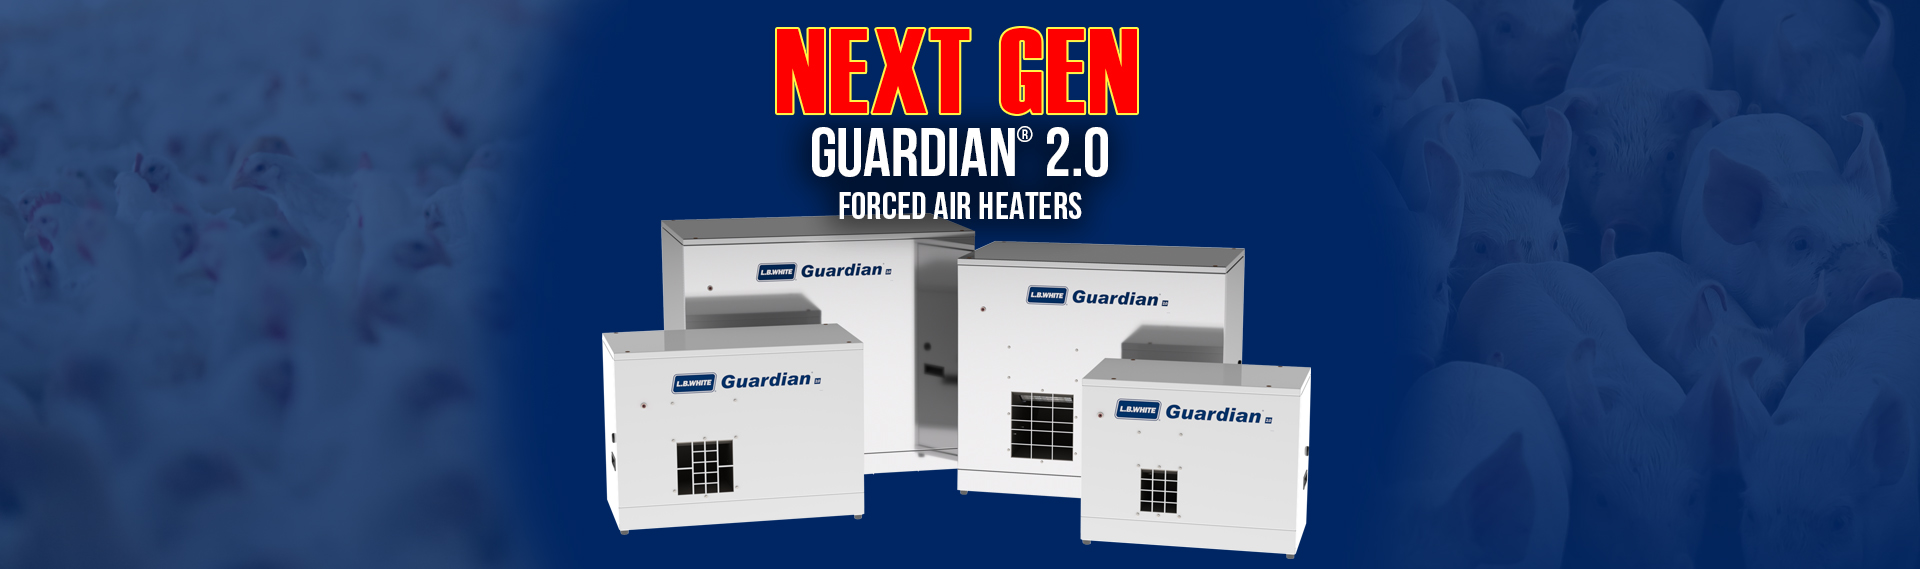 The Guardian 2.0 Forced Air Heater - Newly Reimagined